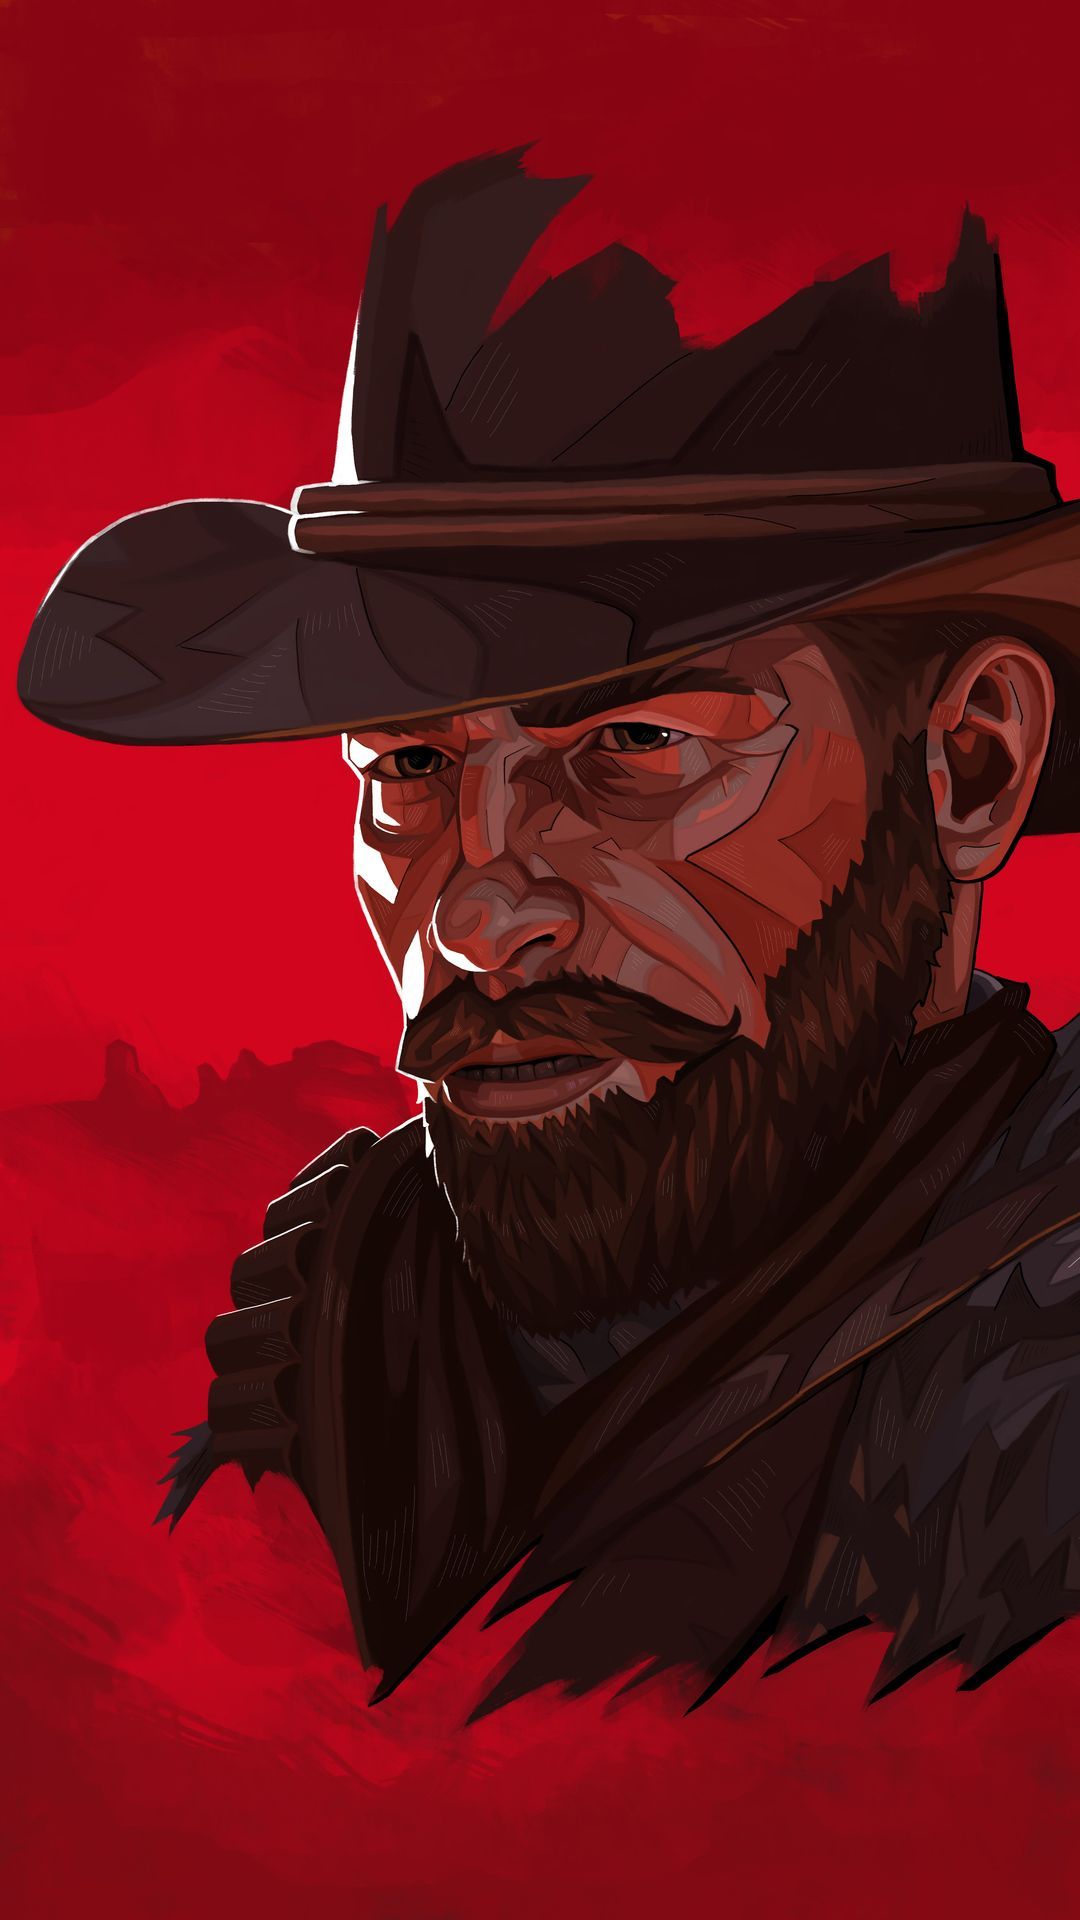 Arthur Morgan Red Dead Redemption 2 4k 2019 Mobile Wallpaper iPhone, Android, Samsung, Pixe. Red dead redemption, Red dead redemption art, Red dead redemption ii